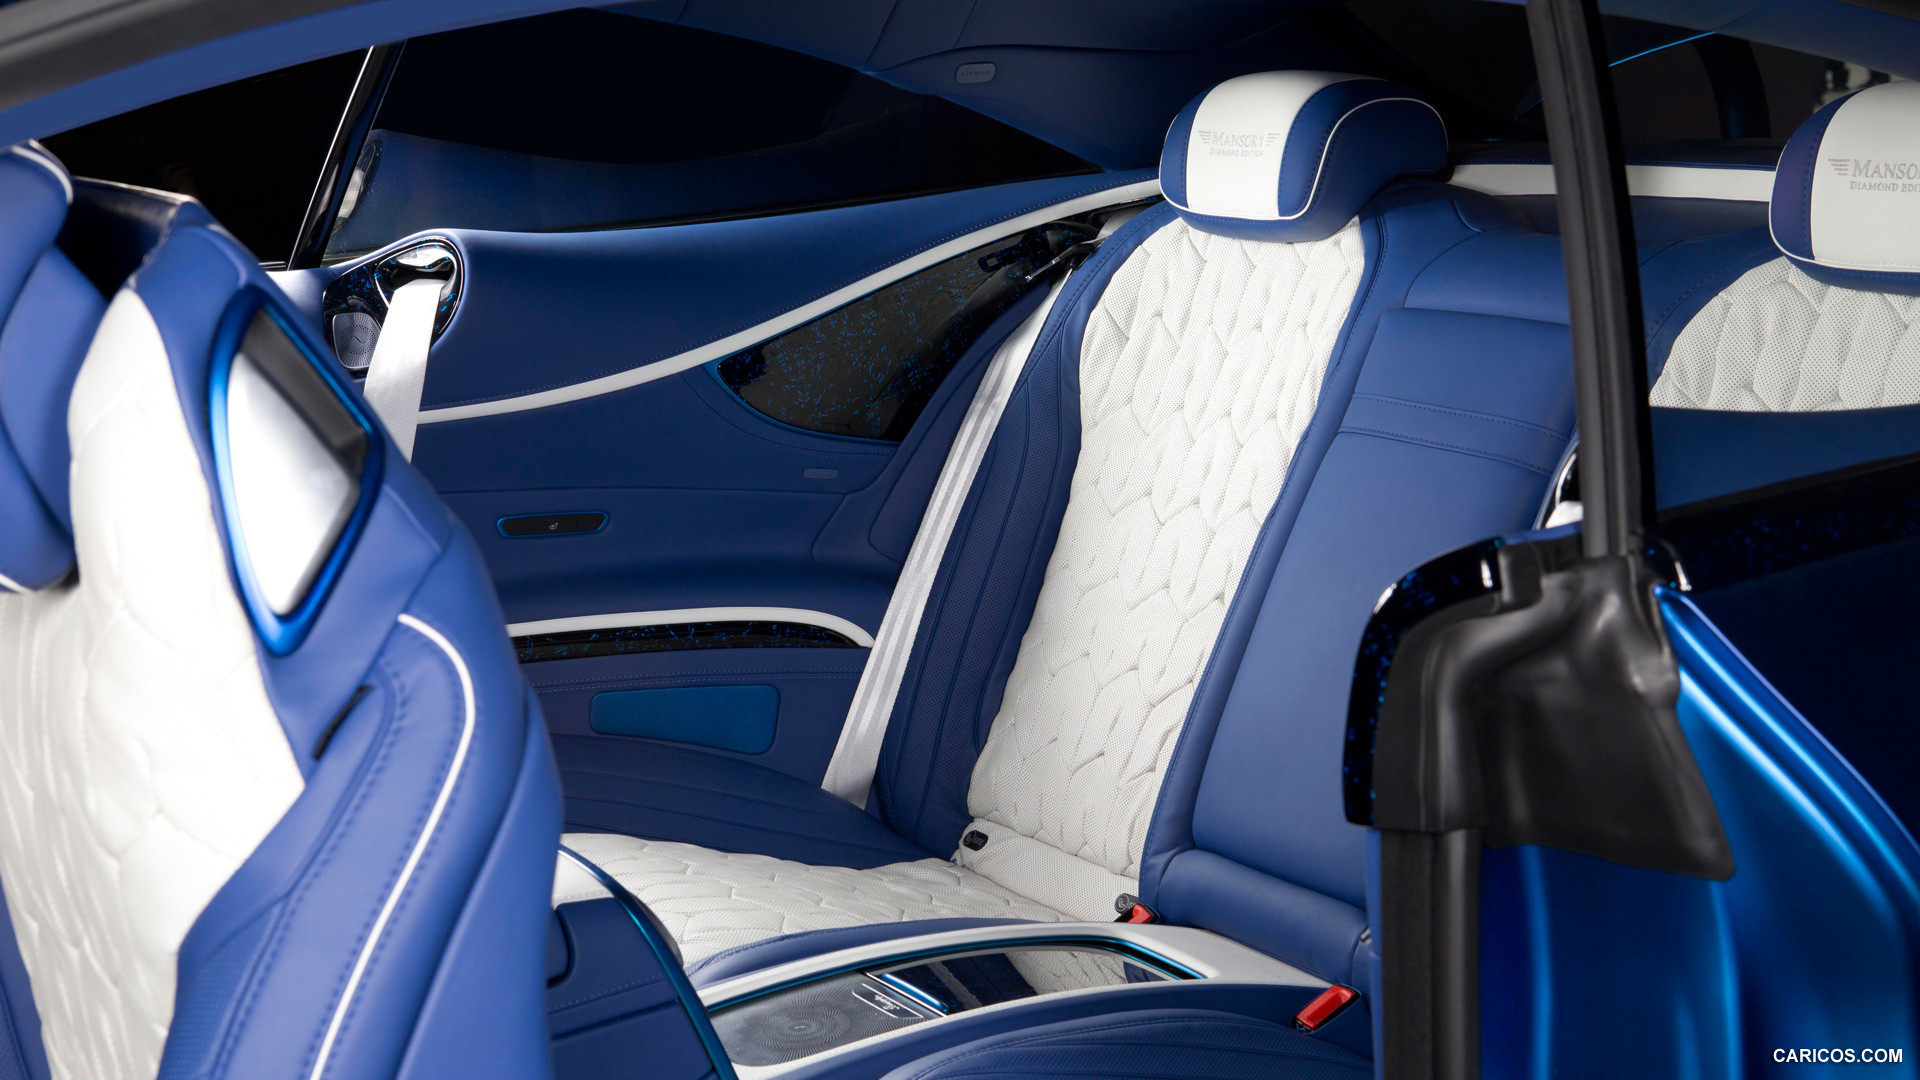 2015 Mansory Mercedes-Benz S63 AMG Coupe Diamond Edition  - Interior Rear Seats, #7 of 7